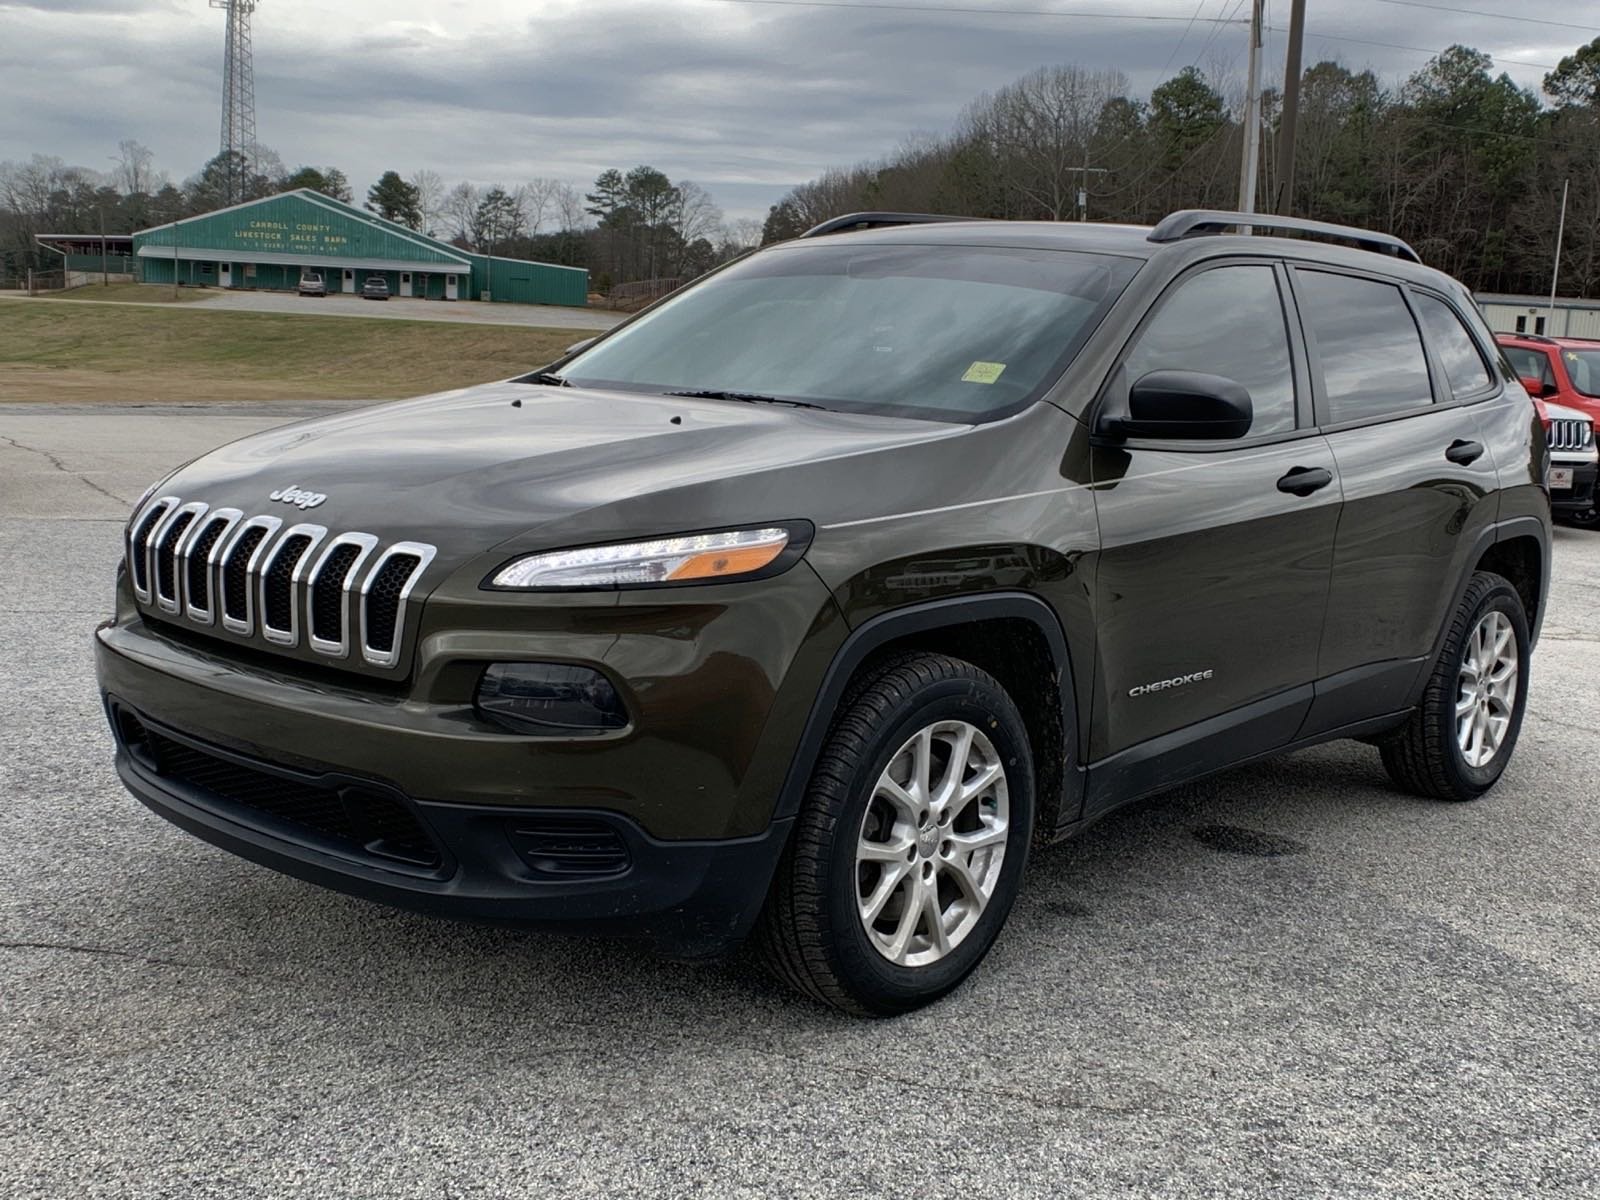 PreOwned 2016 Jeep Cherokee Sport Sport Utility in